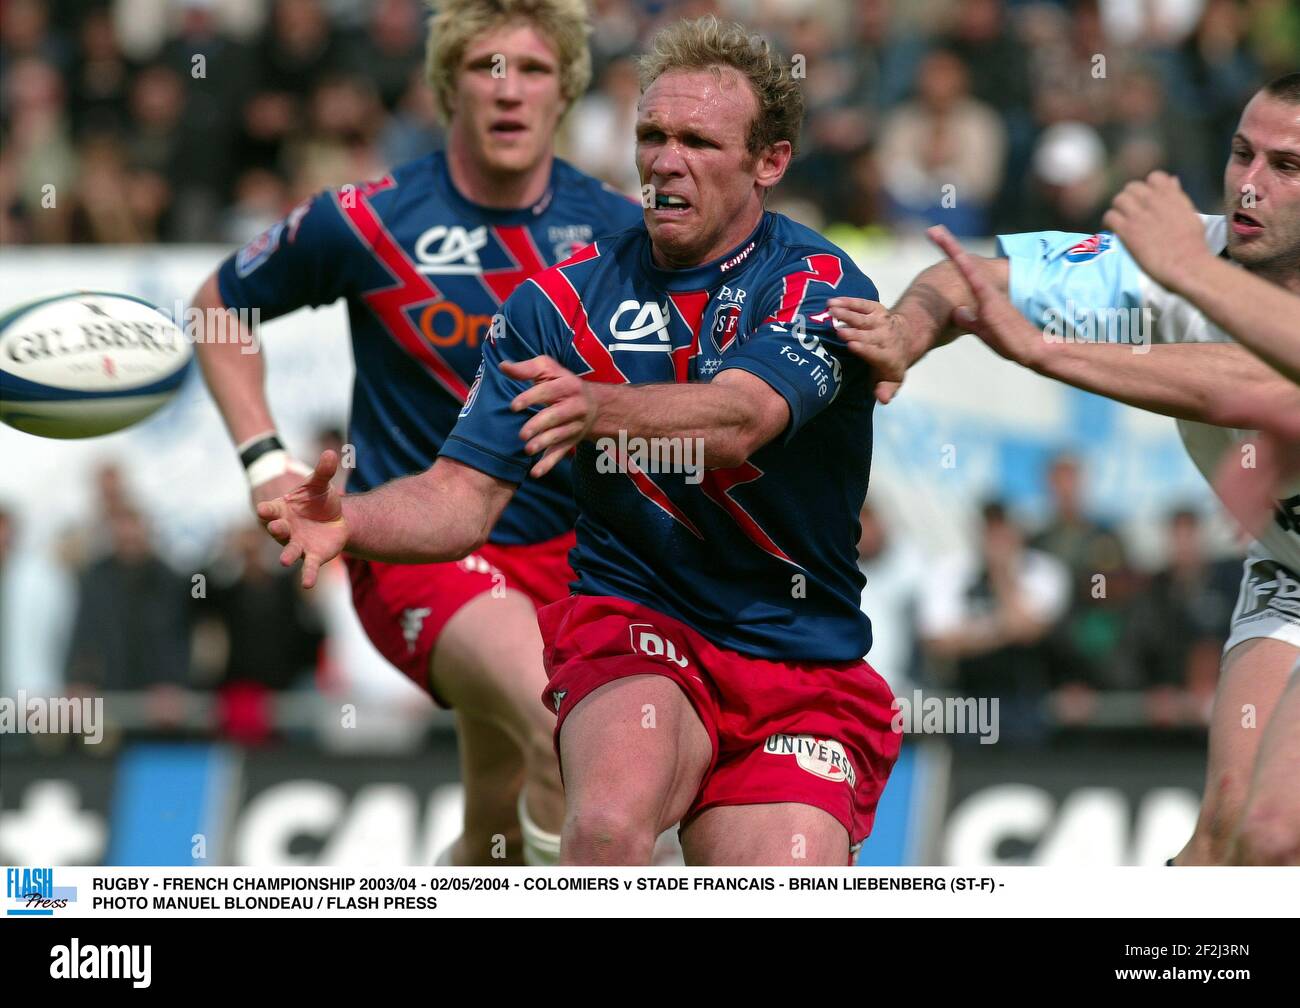 RUGBY - FRENCH CHAMPIONSHIP 2003/04 - 02/05/2004 - COLOMIERS v STADE FRANCAIS - BRIAN LIEBENBERG (ST-F) - PHOTO MANUEL BLONDEAU / FLASH PRESS Stock Photo